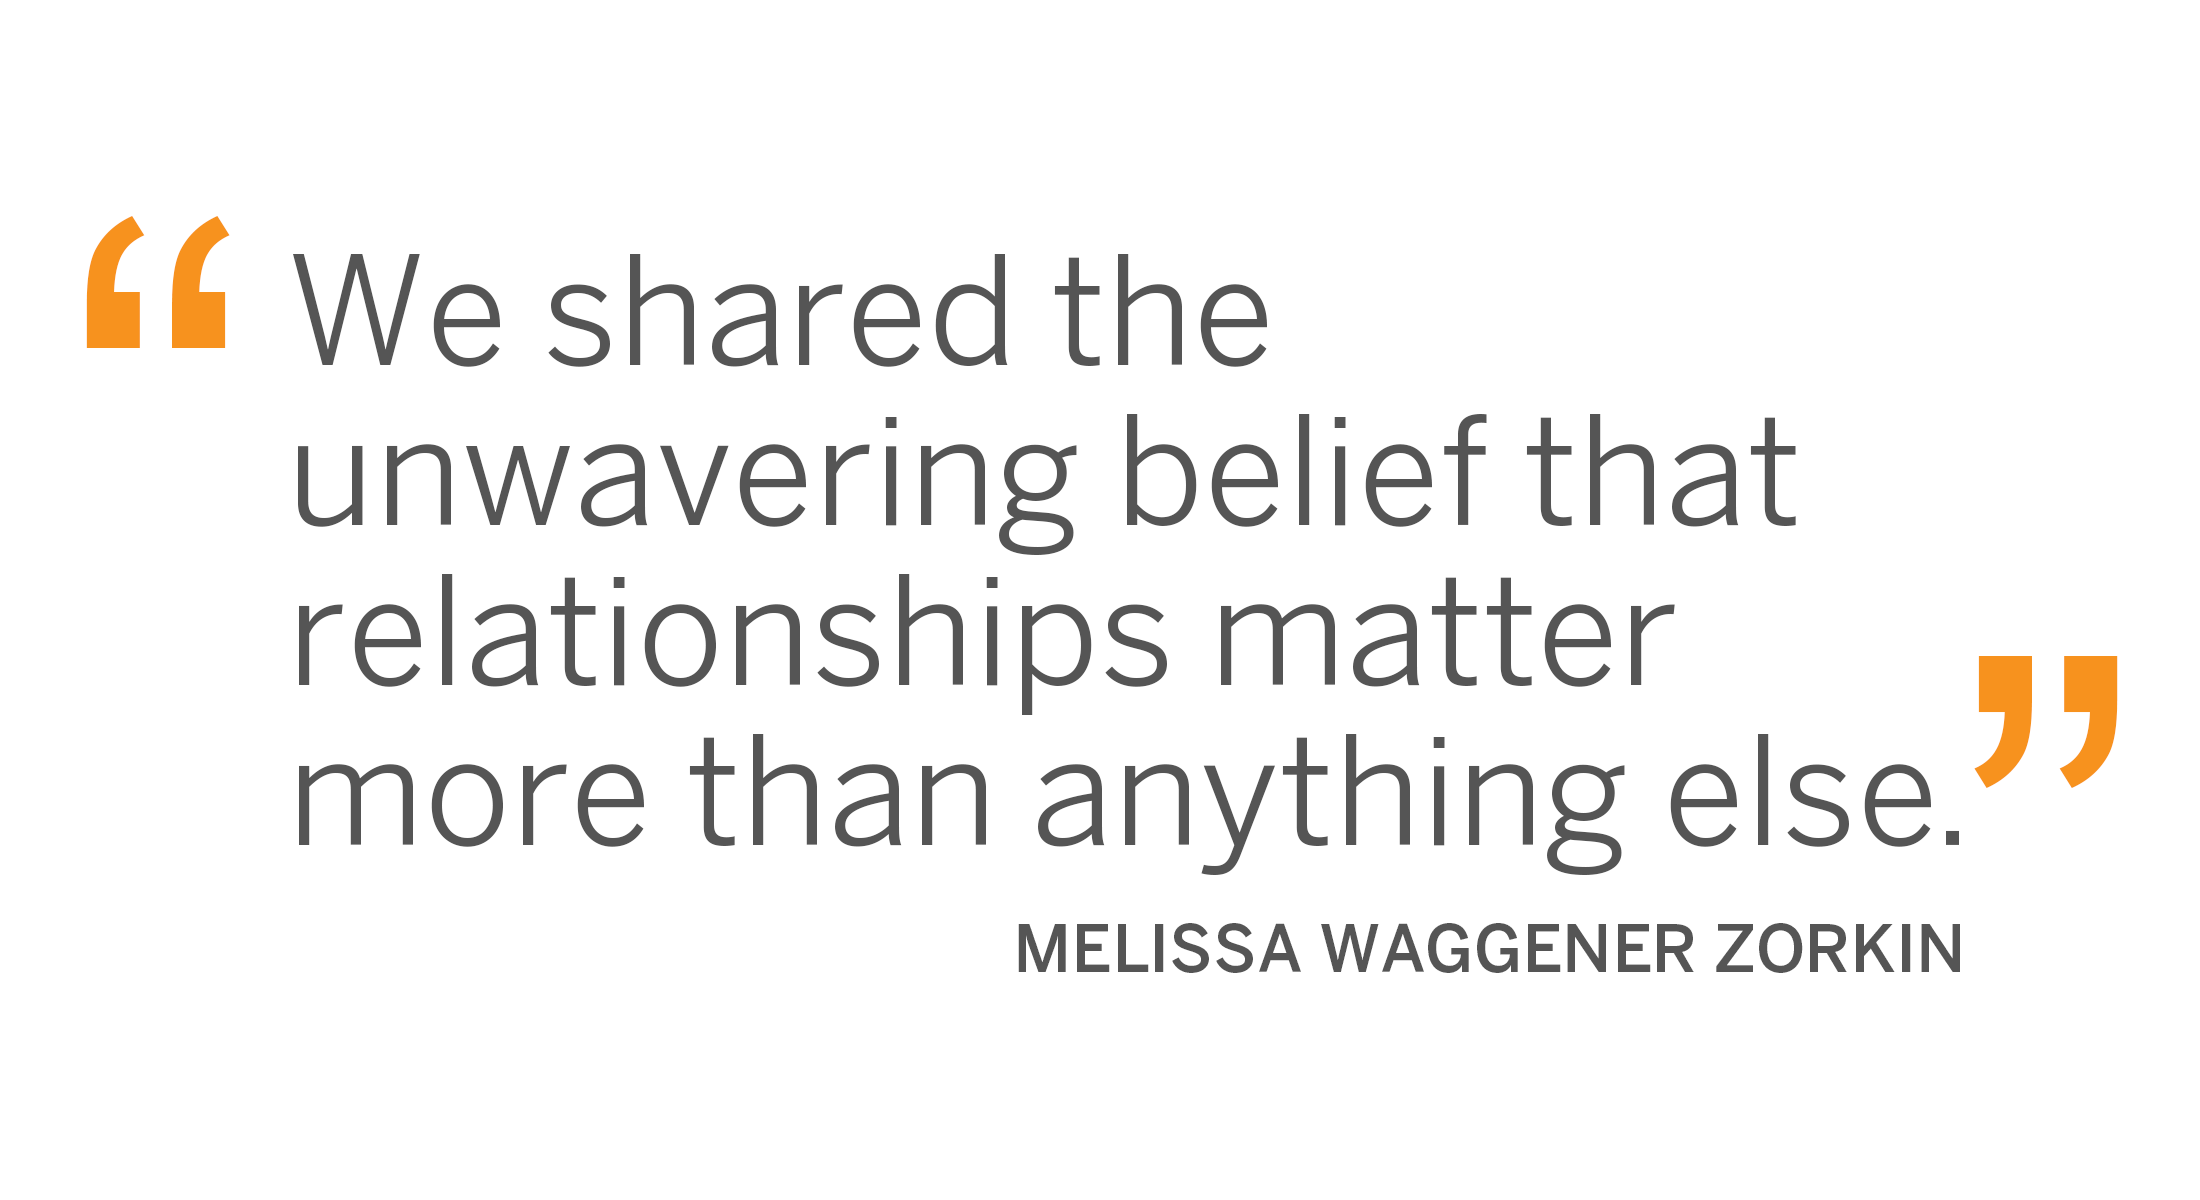 "We shared the unwavering belief that relationships matter more than anything else." Melissa Waggener Zorkin